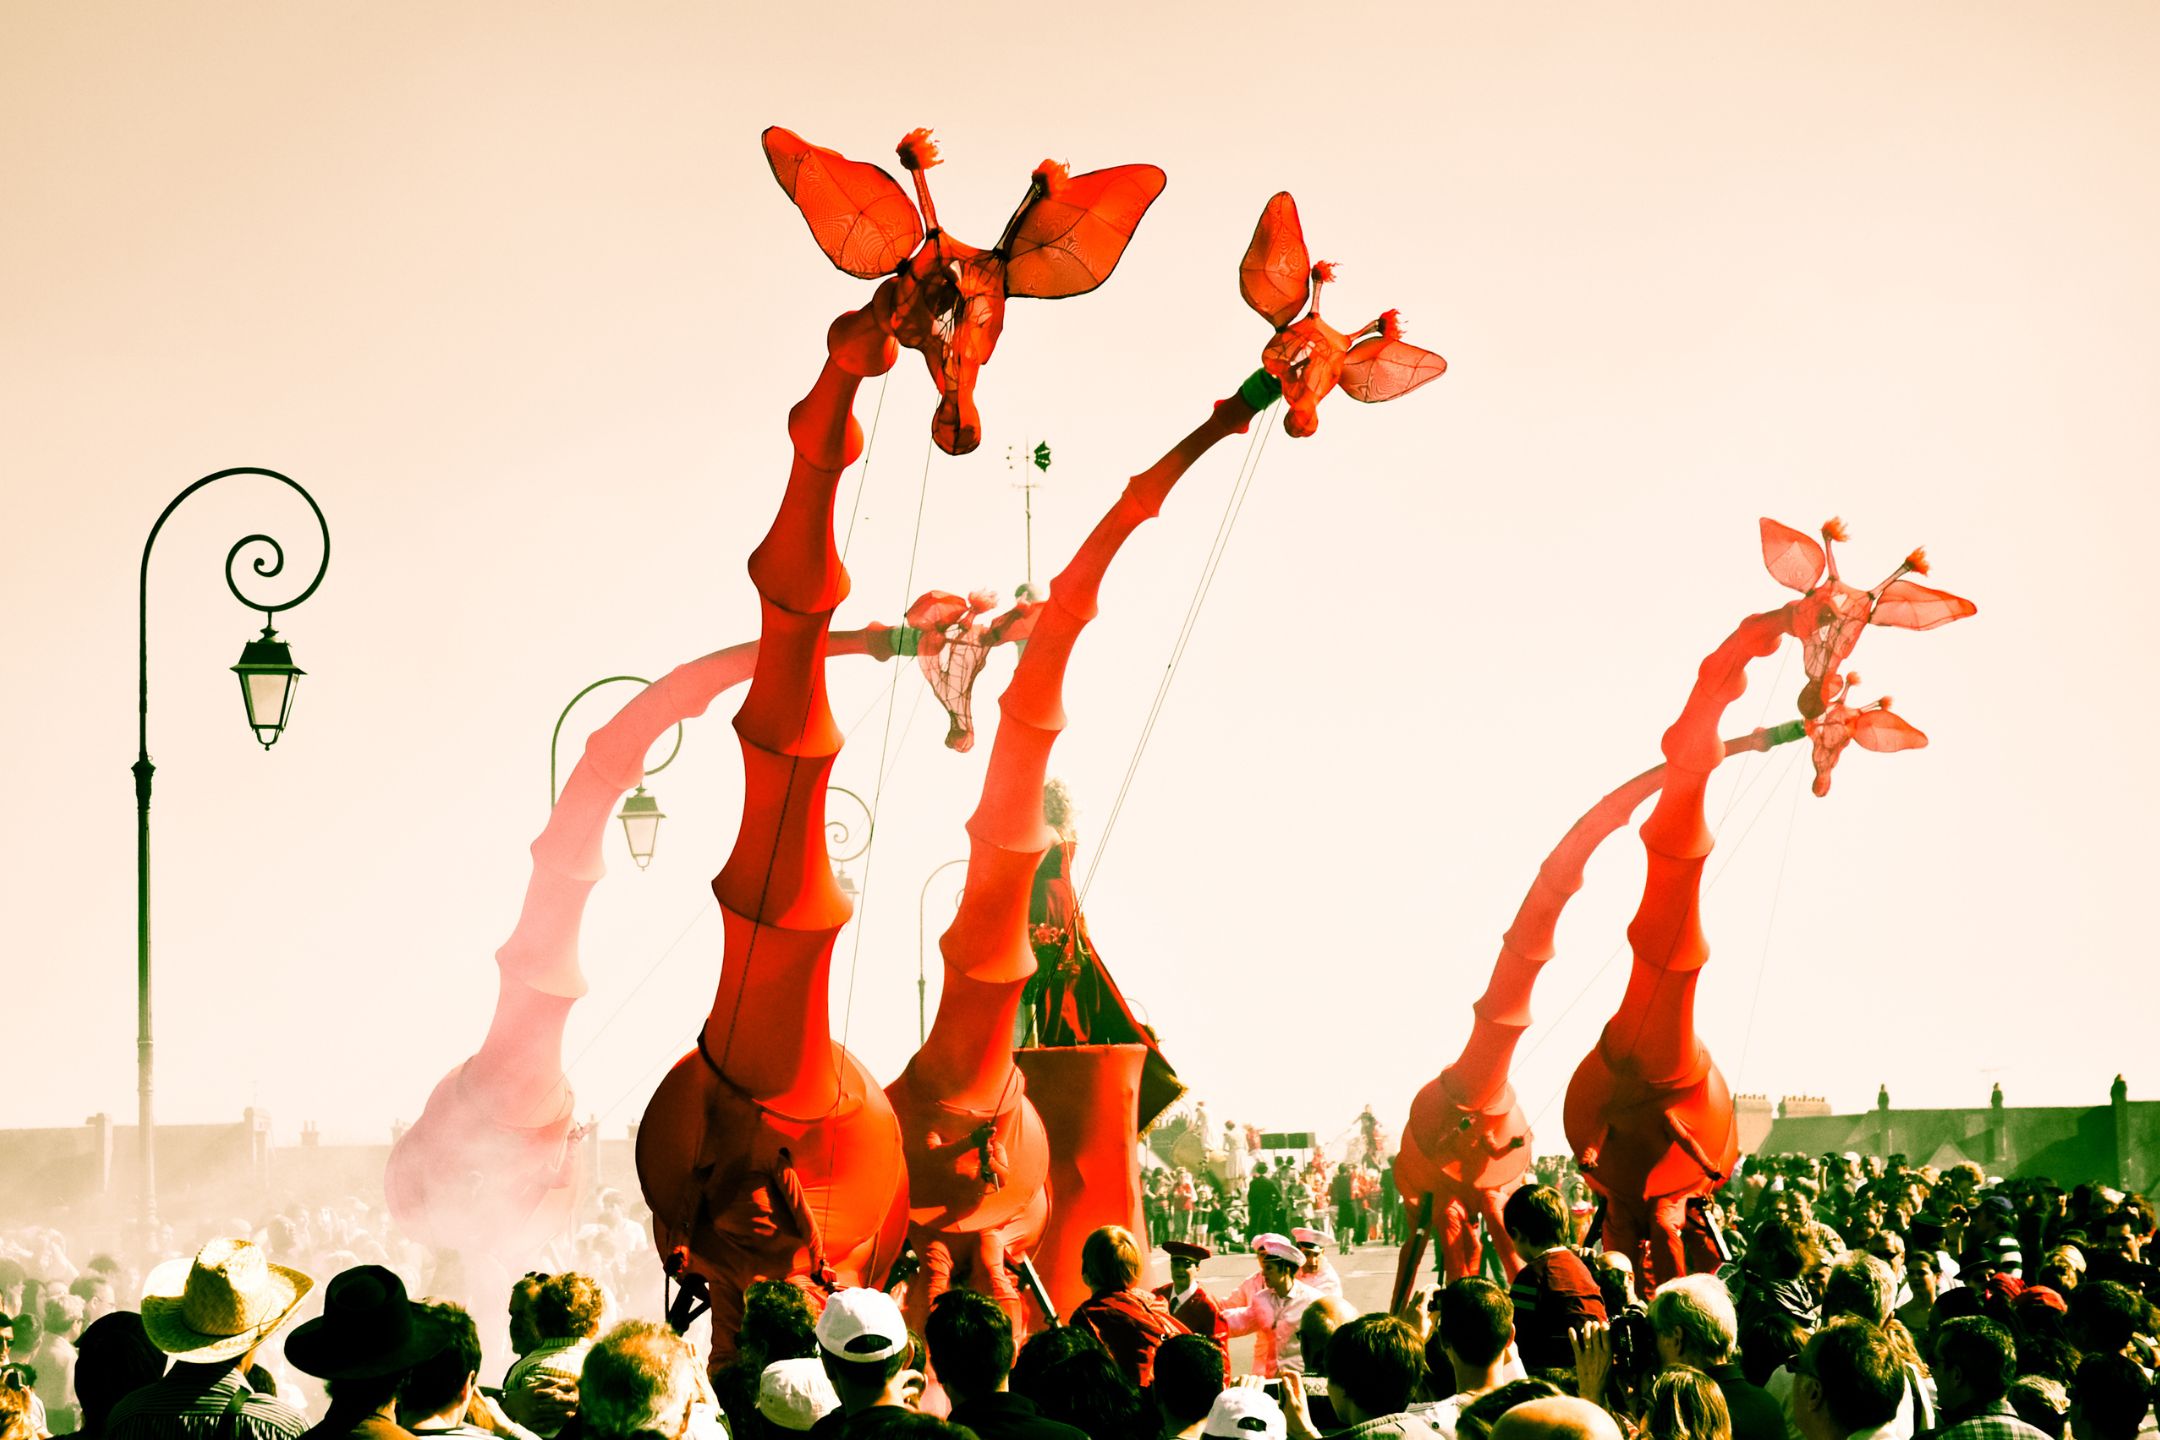 Street performers wear extraordinary red costumes, with long girafe-like necks